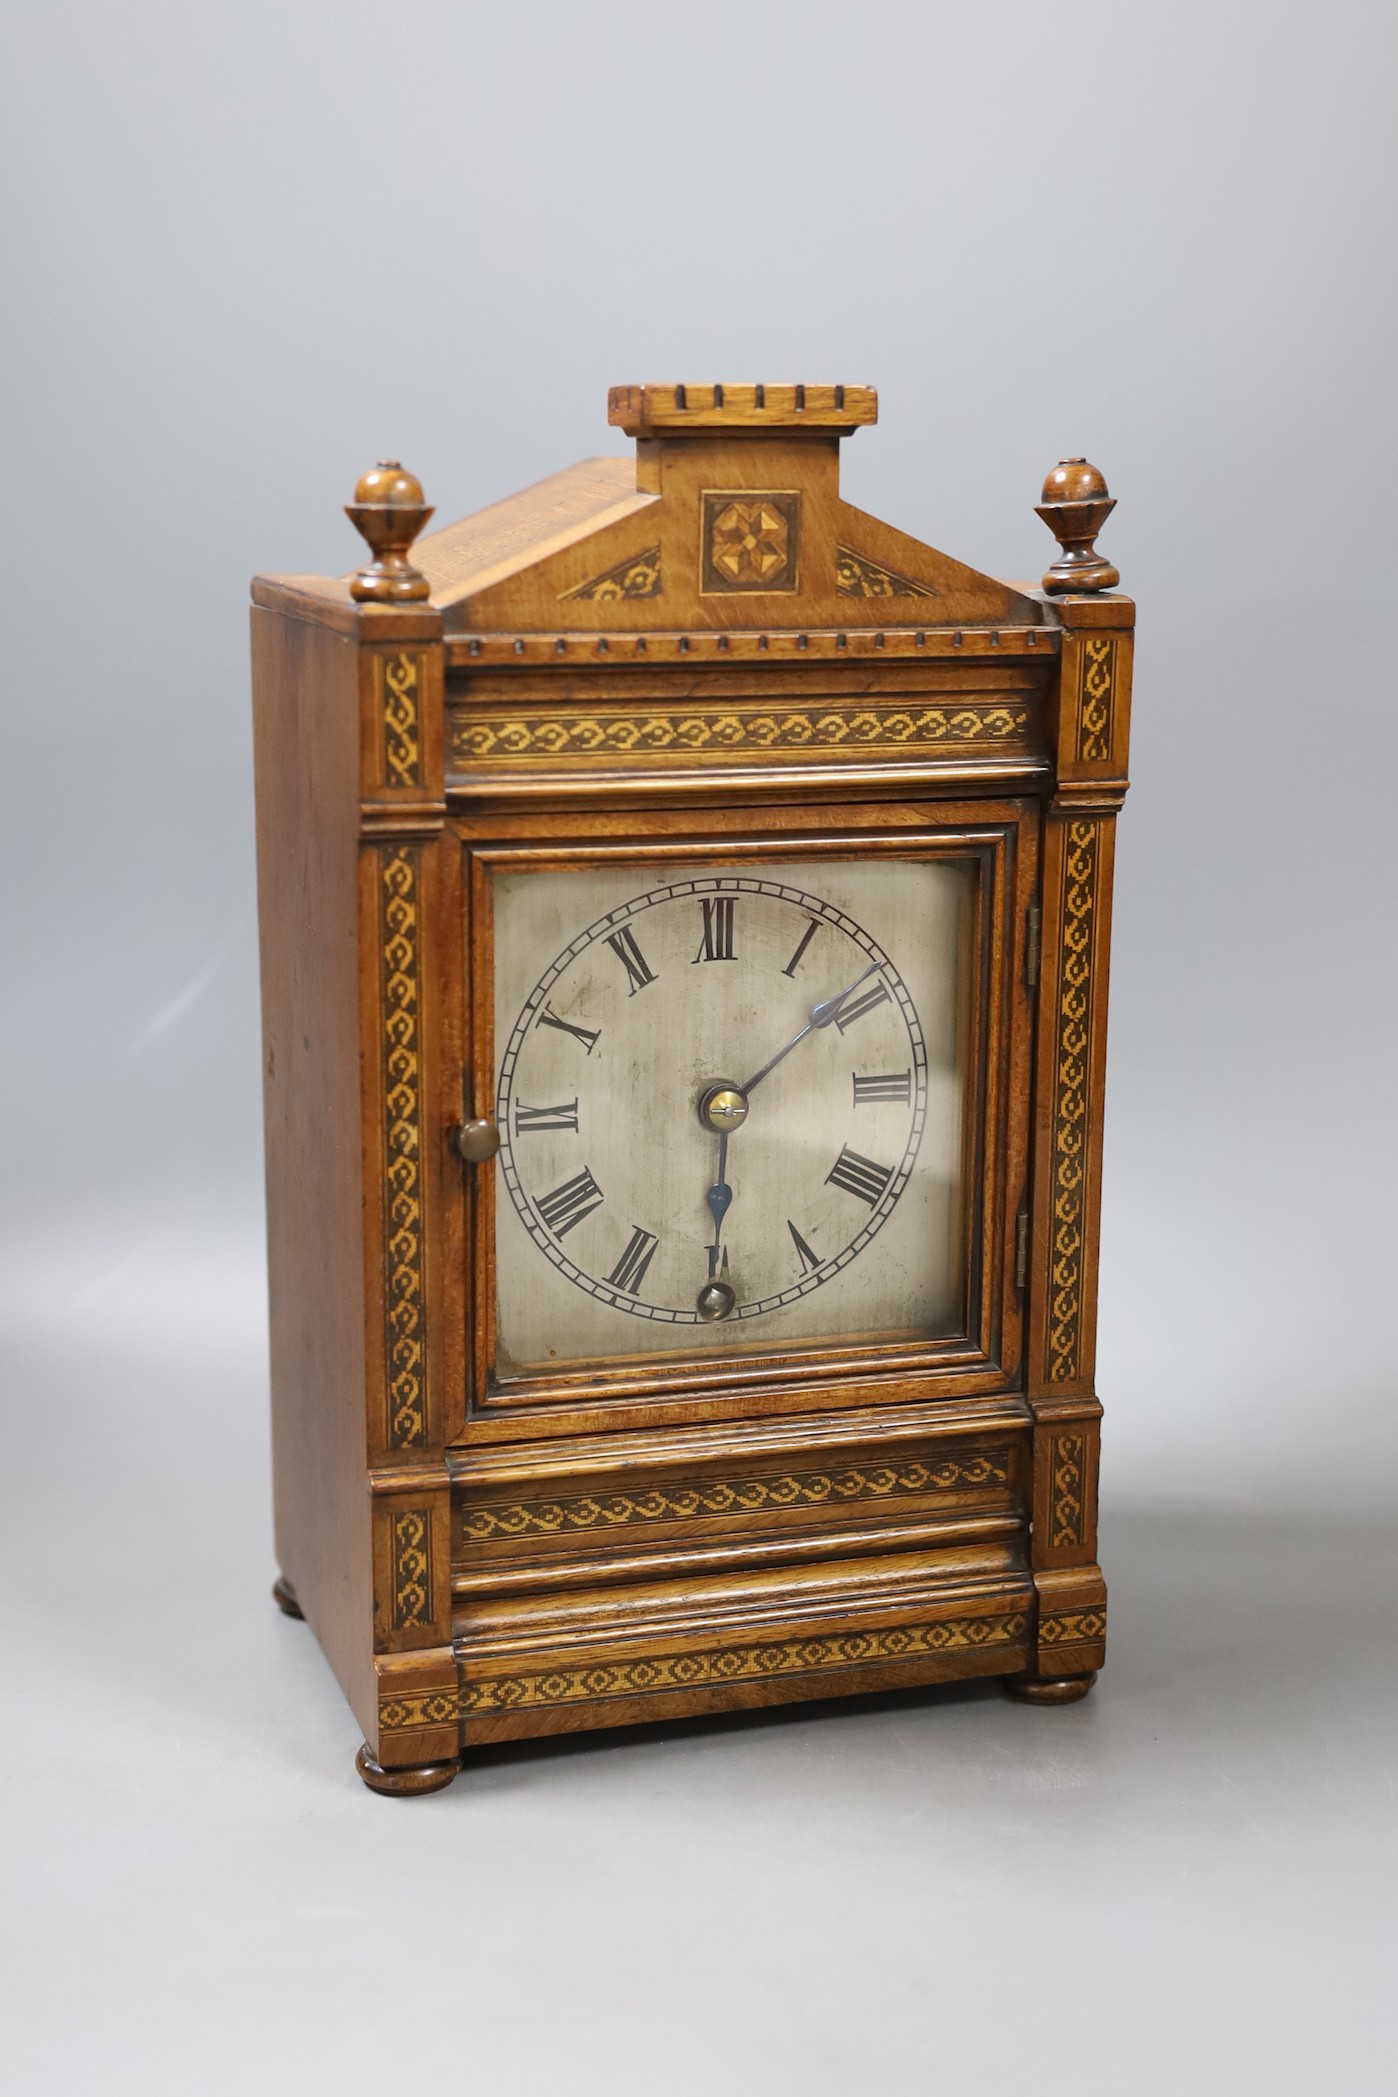 A late 19th century mantel clock in a walnut and Tunbridgeware banded case